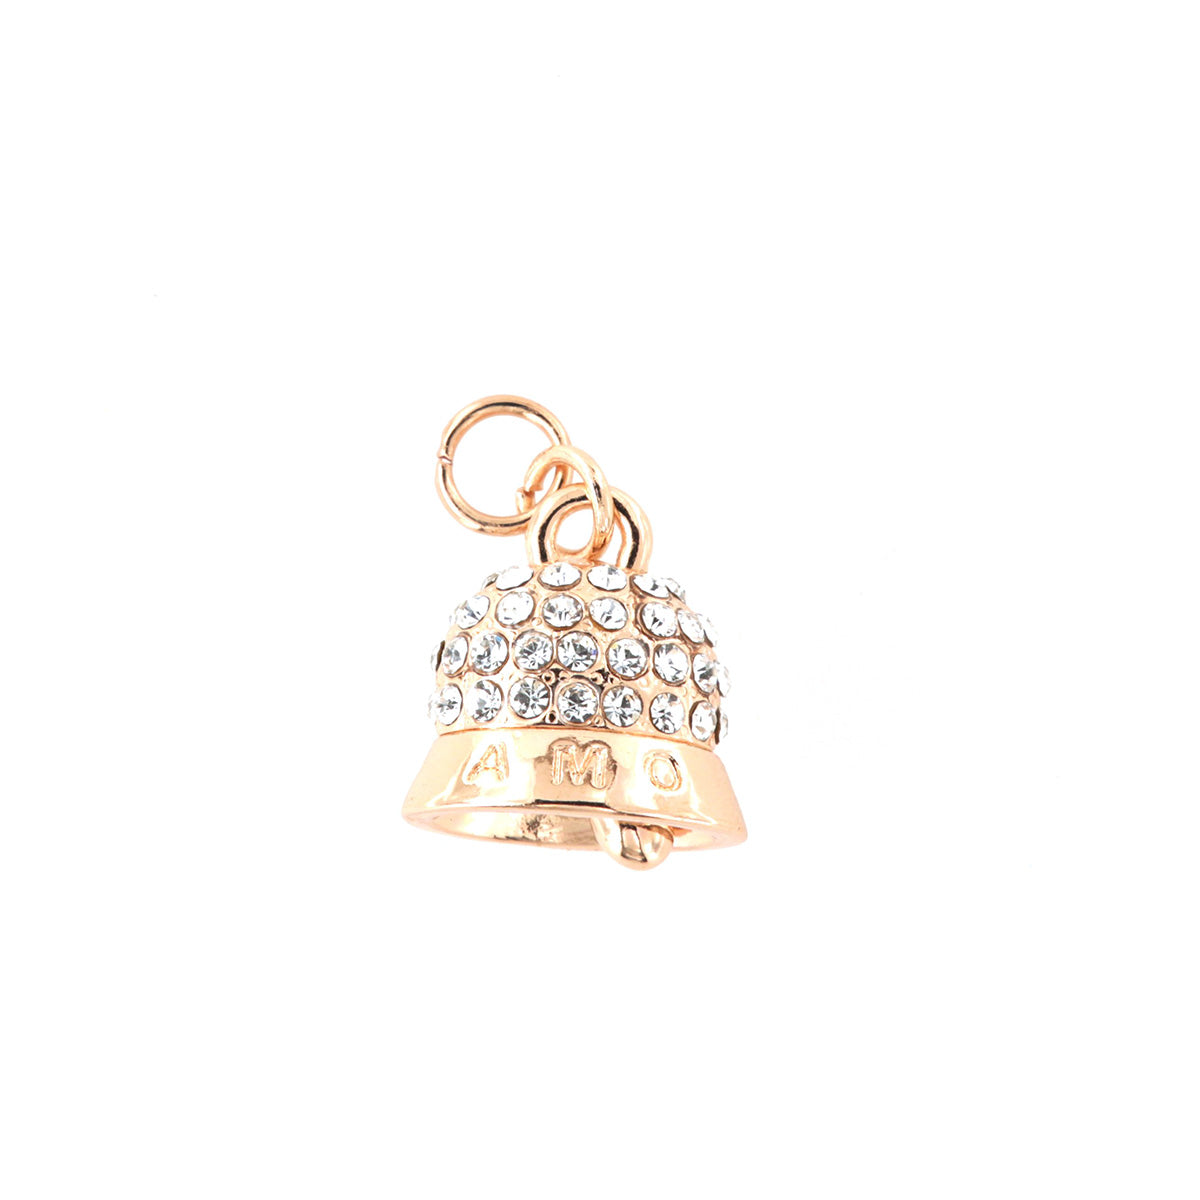 Metal pendant charming bell embellished with crystals